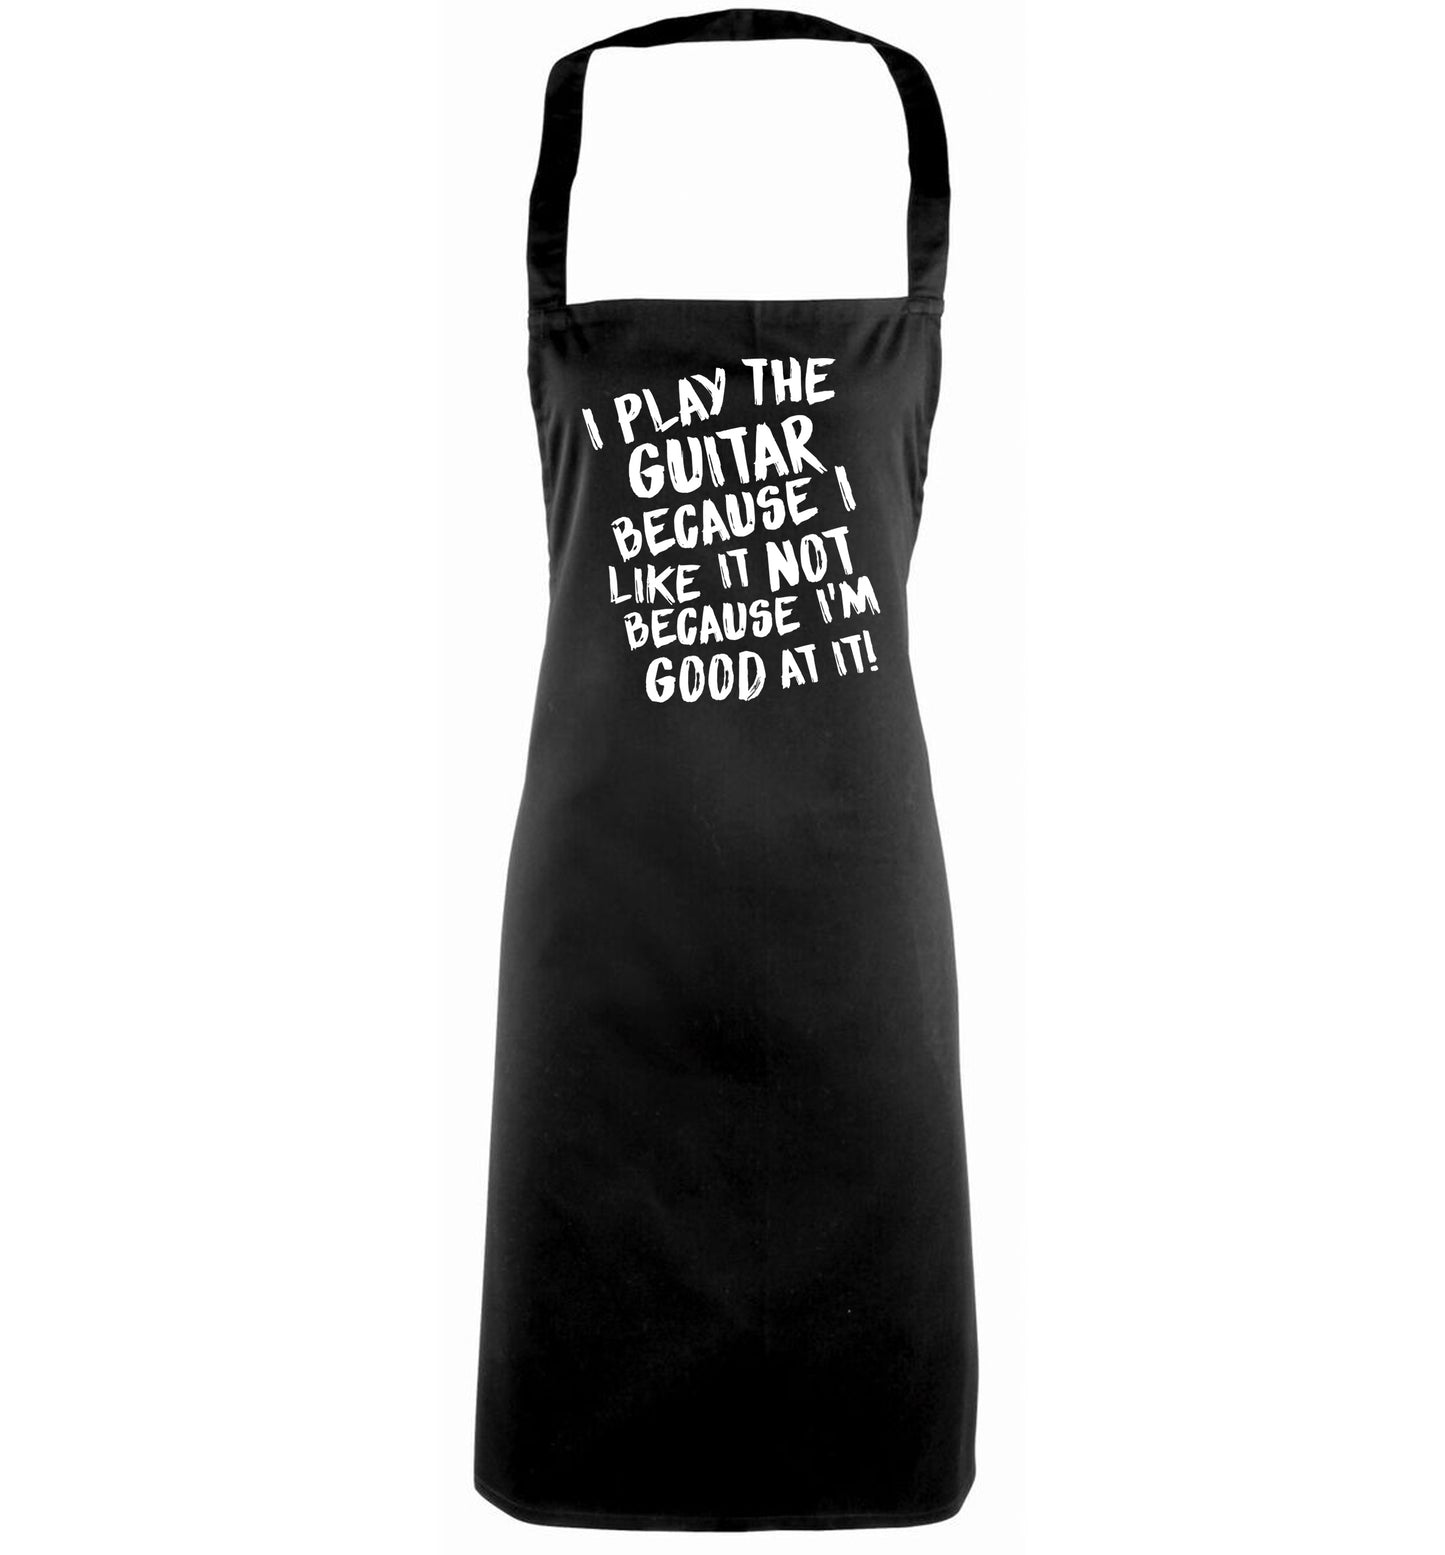 I play the guitar because I like it not because I'm good at it black apron